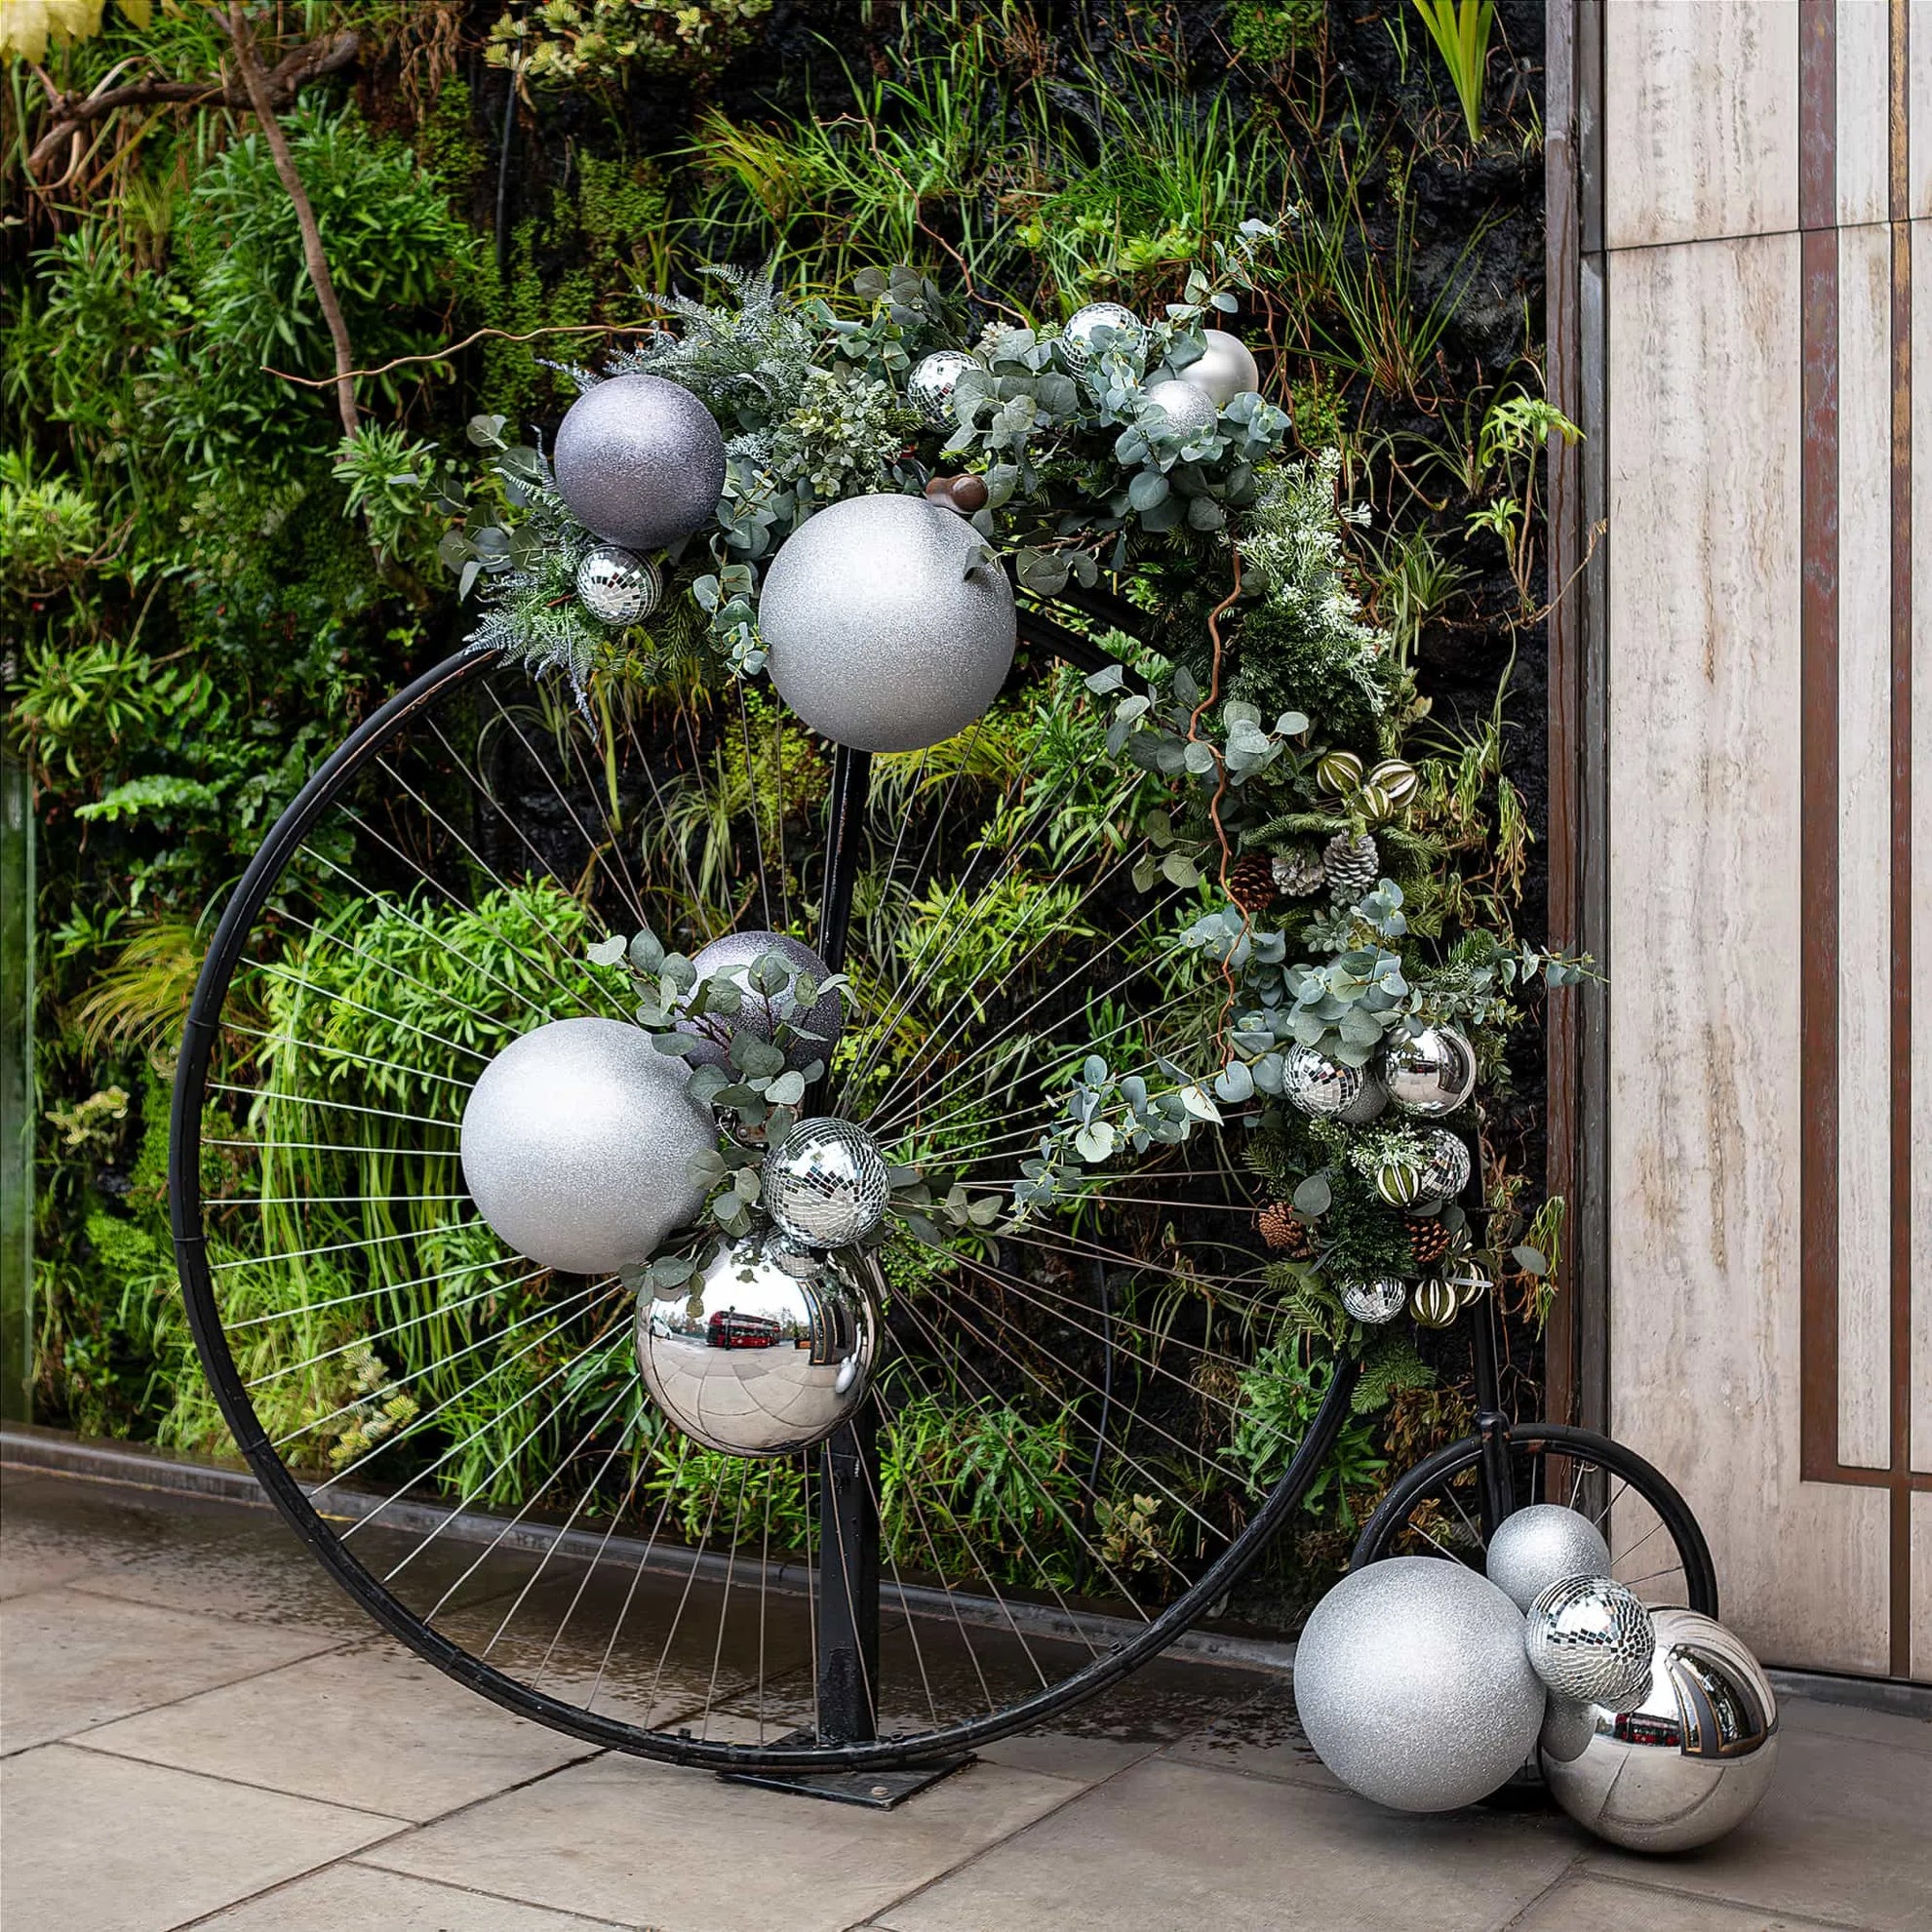 An inventive and whimsical bespoke floral arrangement on display at 'The Athenaeum' hotel featuring a vintage bicycle wheel artistically interwoven with a lavish selection of silver baubles, reflective ornaments, and a lush assortment of eucalyptus and pine, set against the vibrant backdrop of a vertical garden wall. They are designed, created, produced and installed by Amaranté London - Event Florist in London.